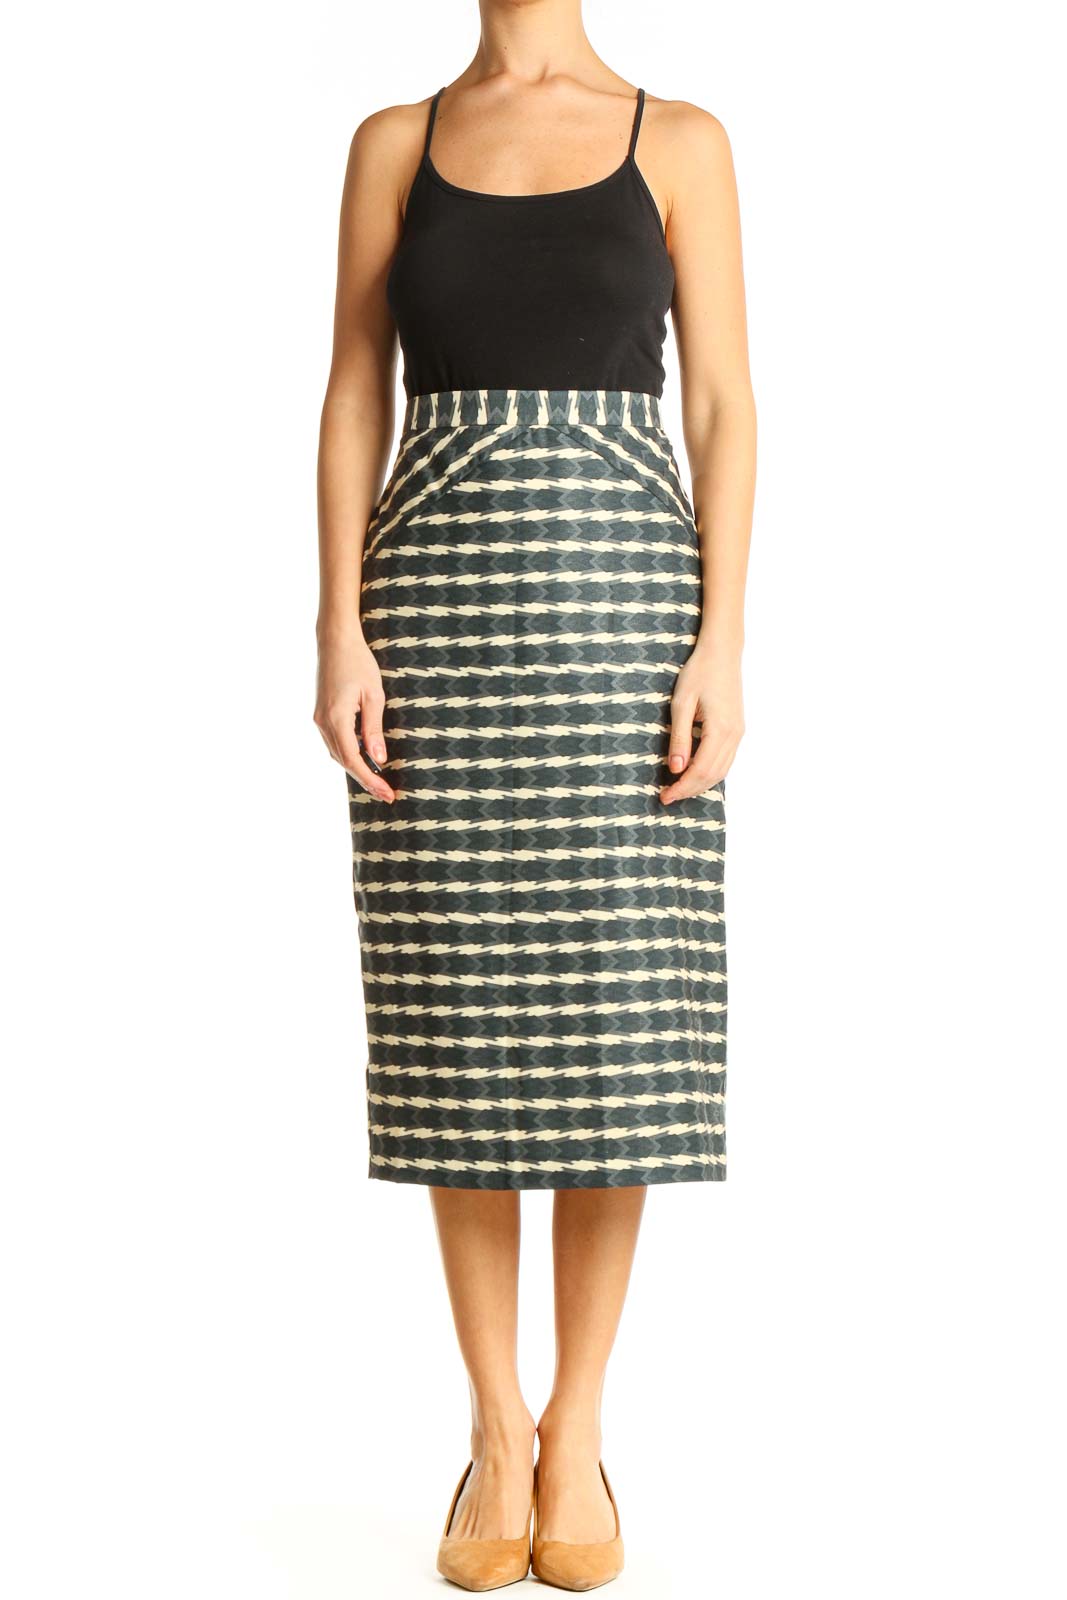 Blue Printed Classic Pencil Skirt Front